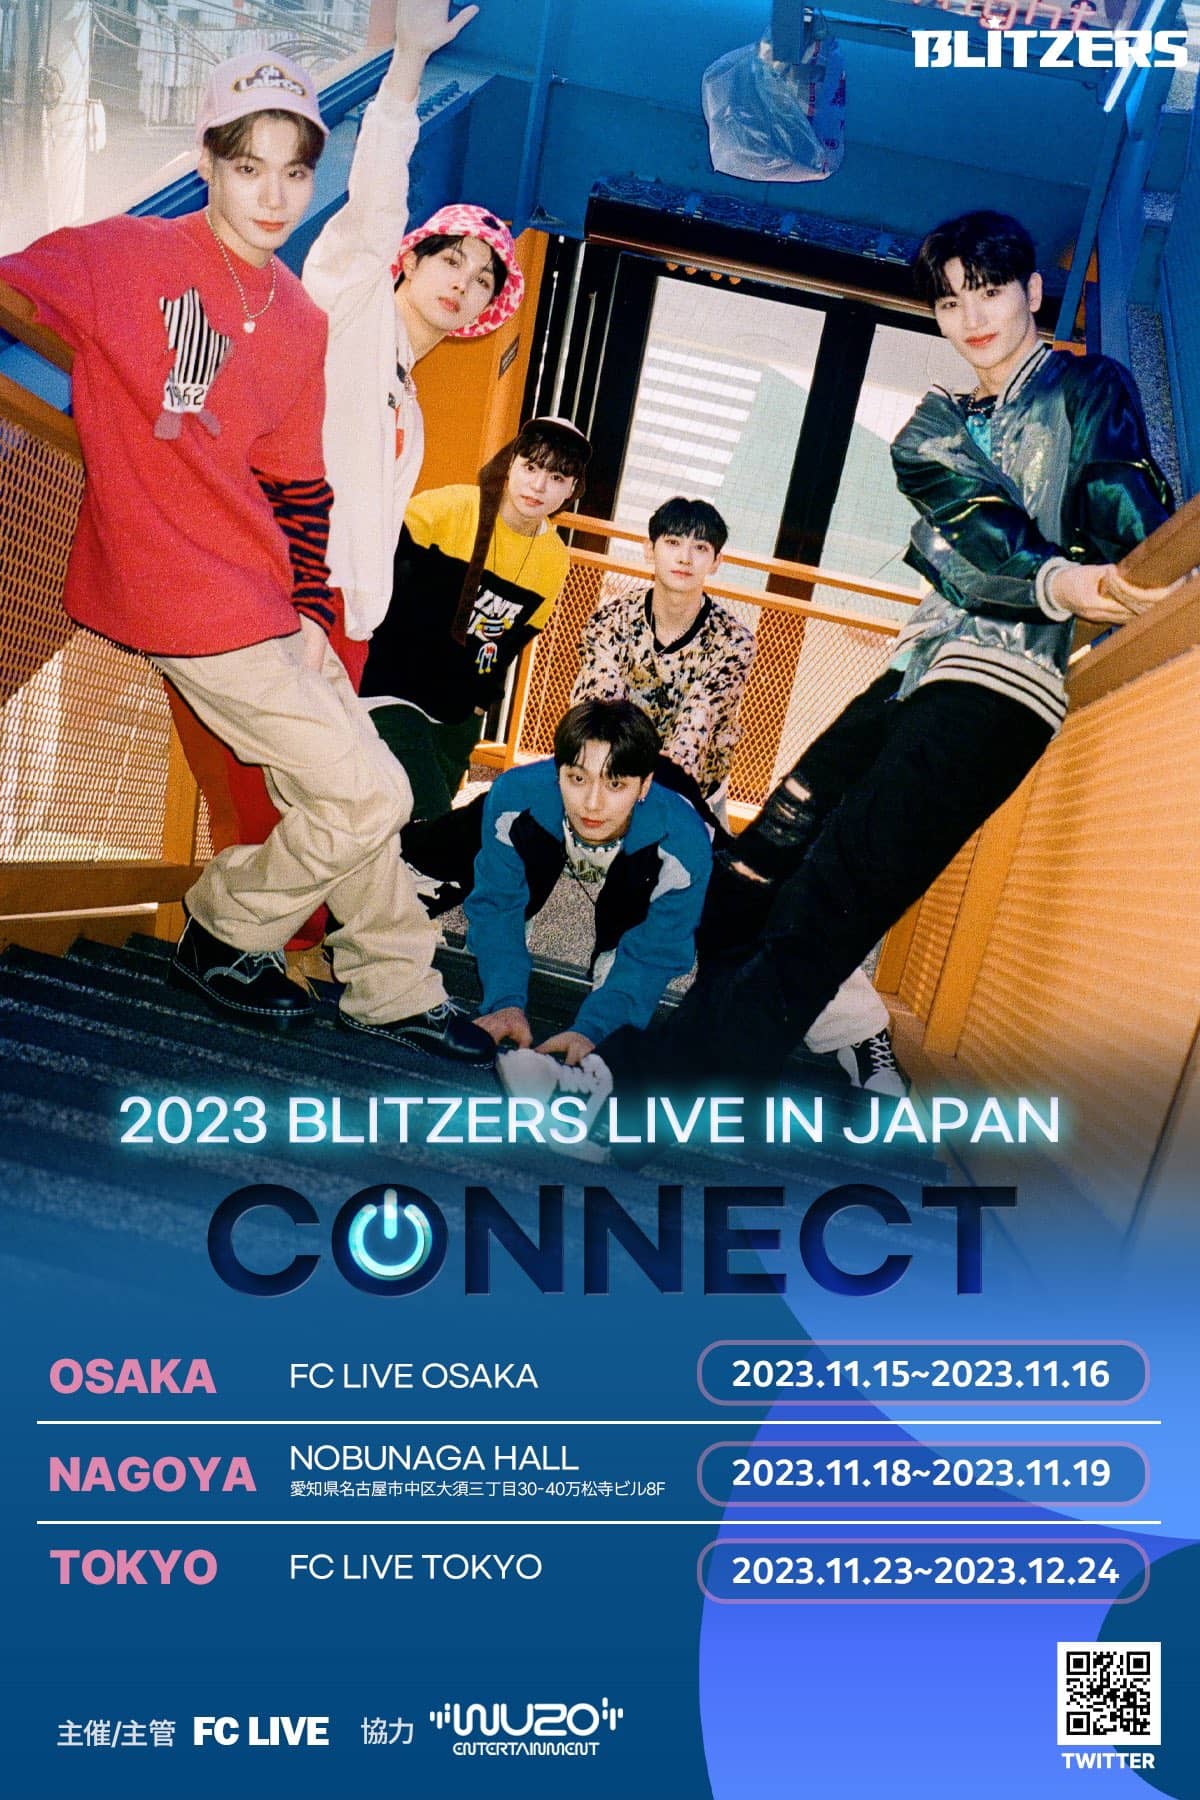 2023 BLITZERS LIVE IN JAPAN CONNECT